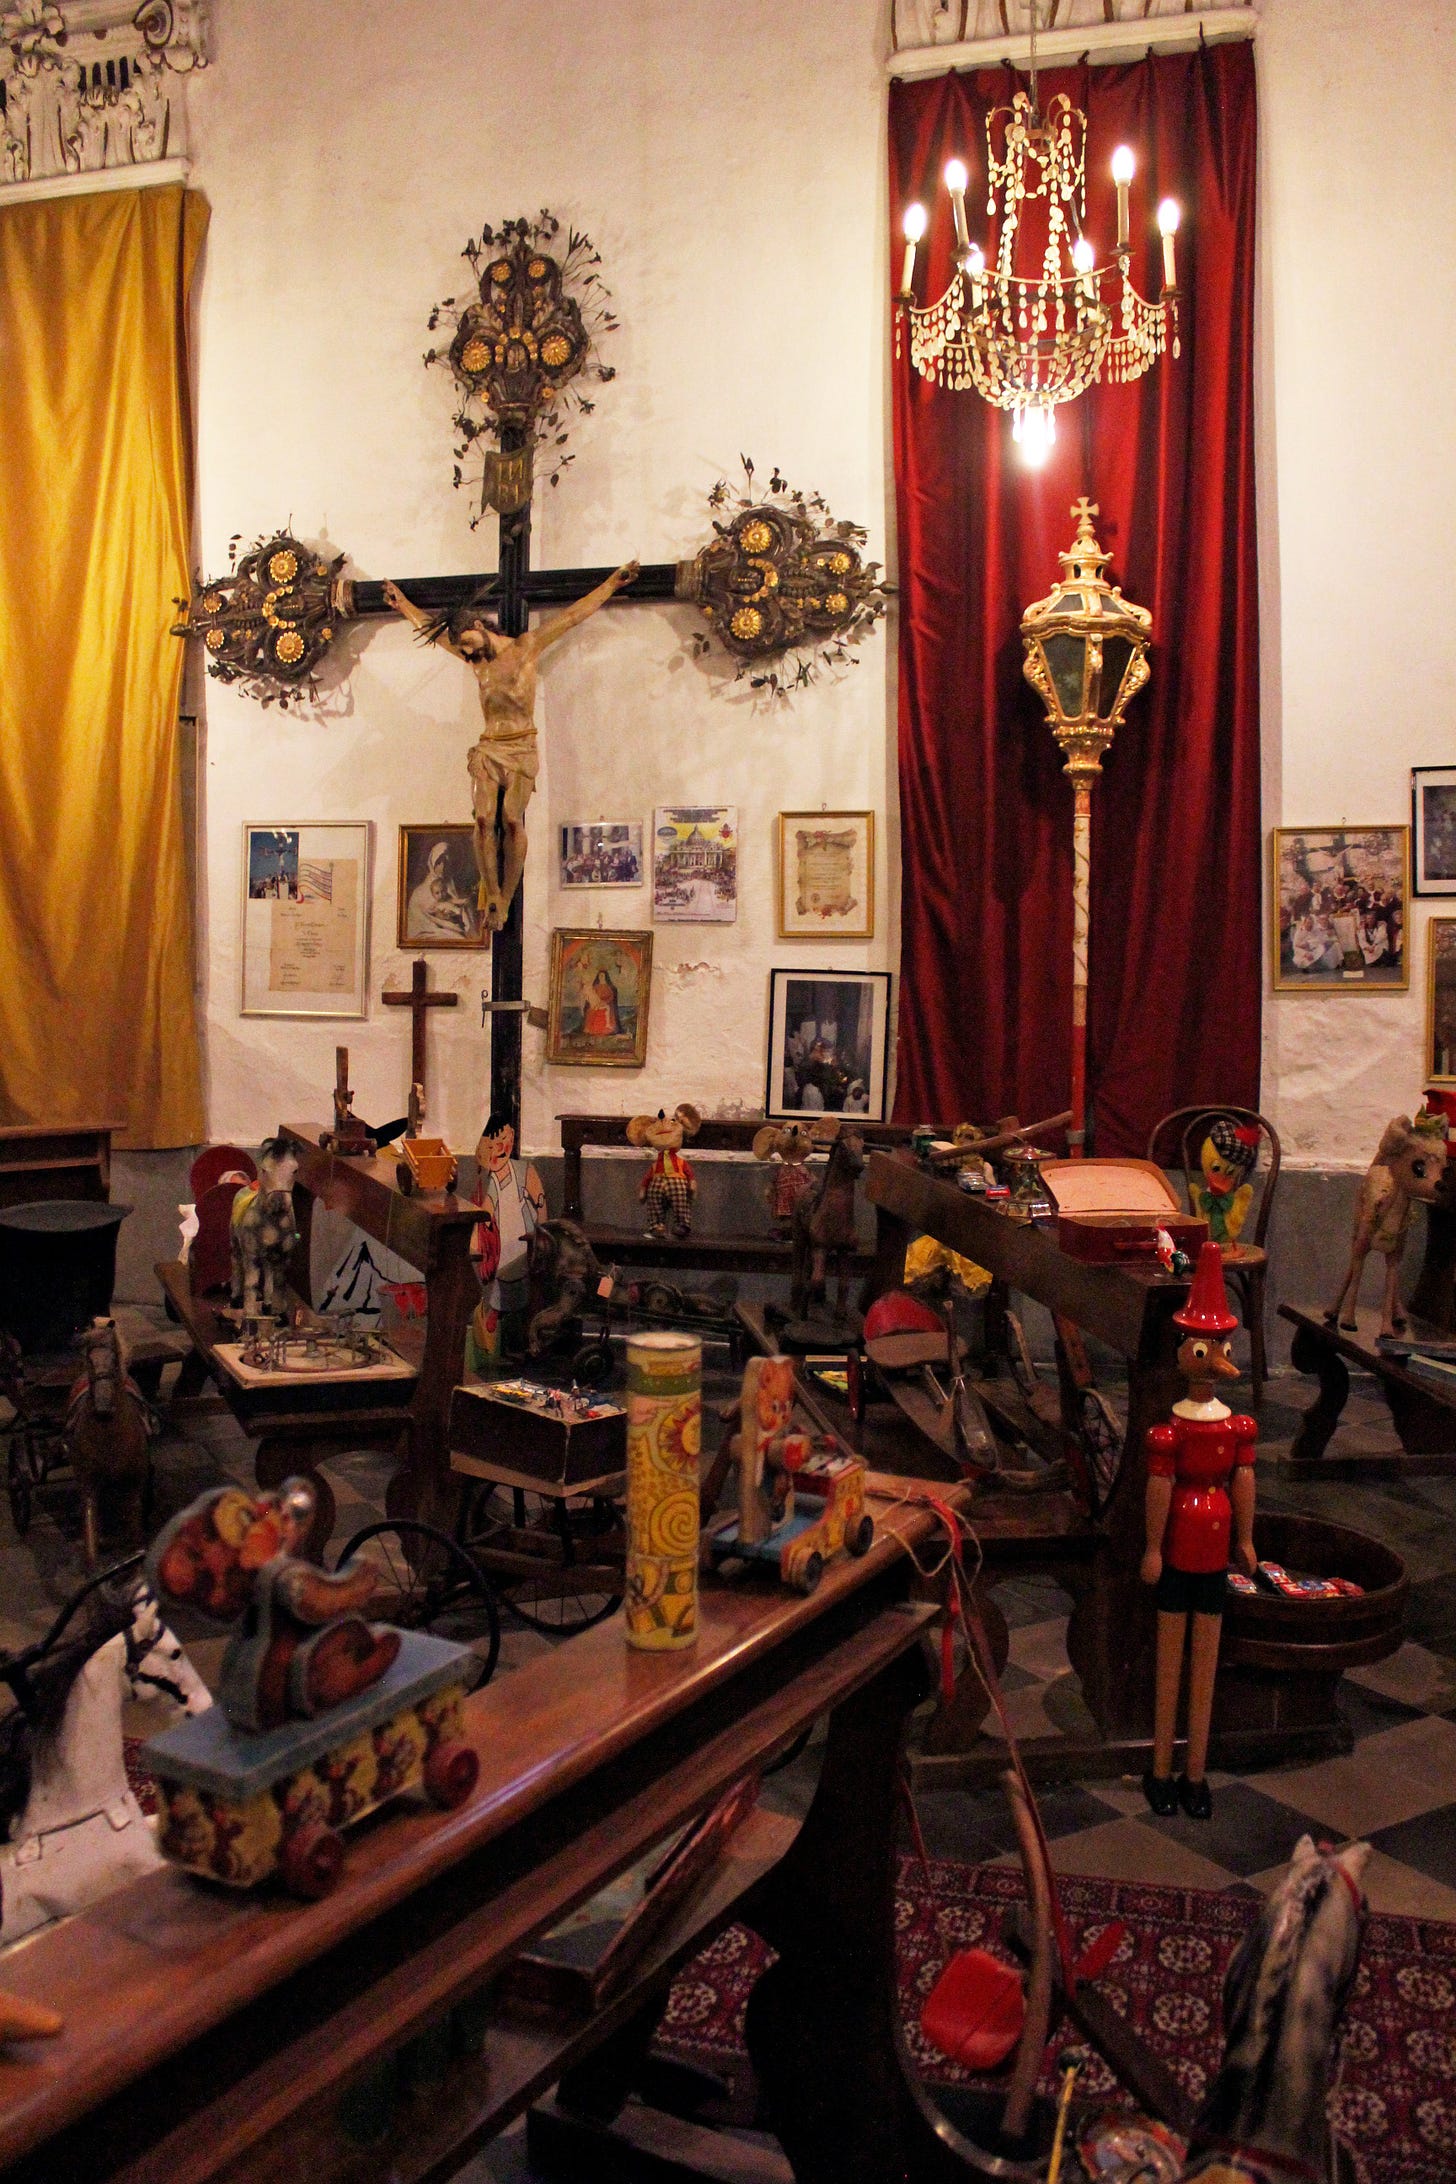 A photo taken in an oratory. There is a large crucifix on the wall and a chandelier overhead, but in the pews are dolls, wooden toys and stuffed animals.